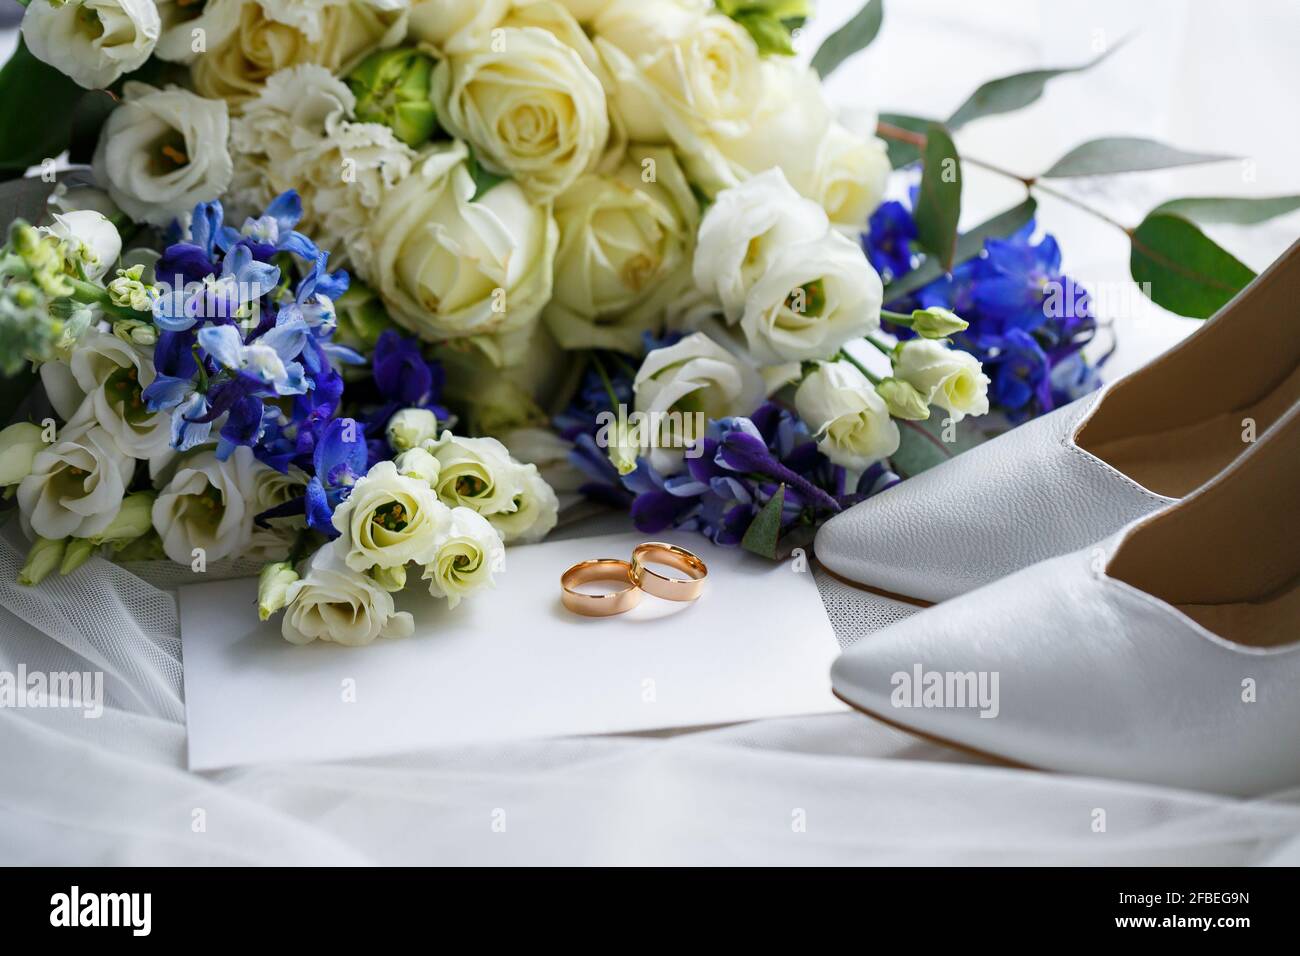 Wedding shoes for the bride. White high-heeled shoes near wedding rings, wedding jewelry. Marriage concept Stock Photo